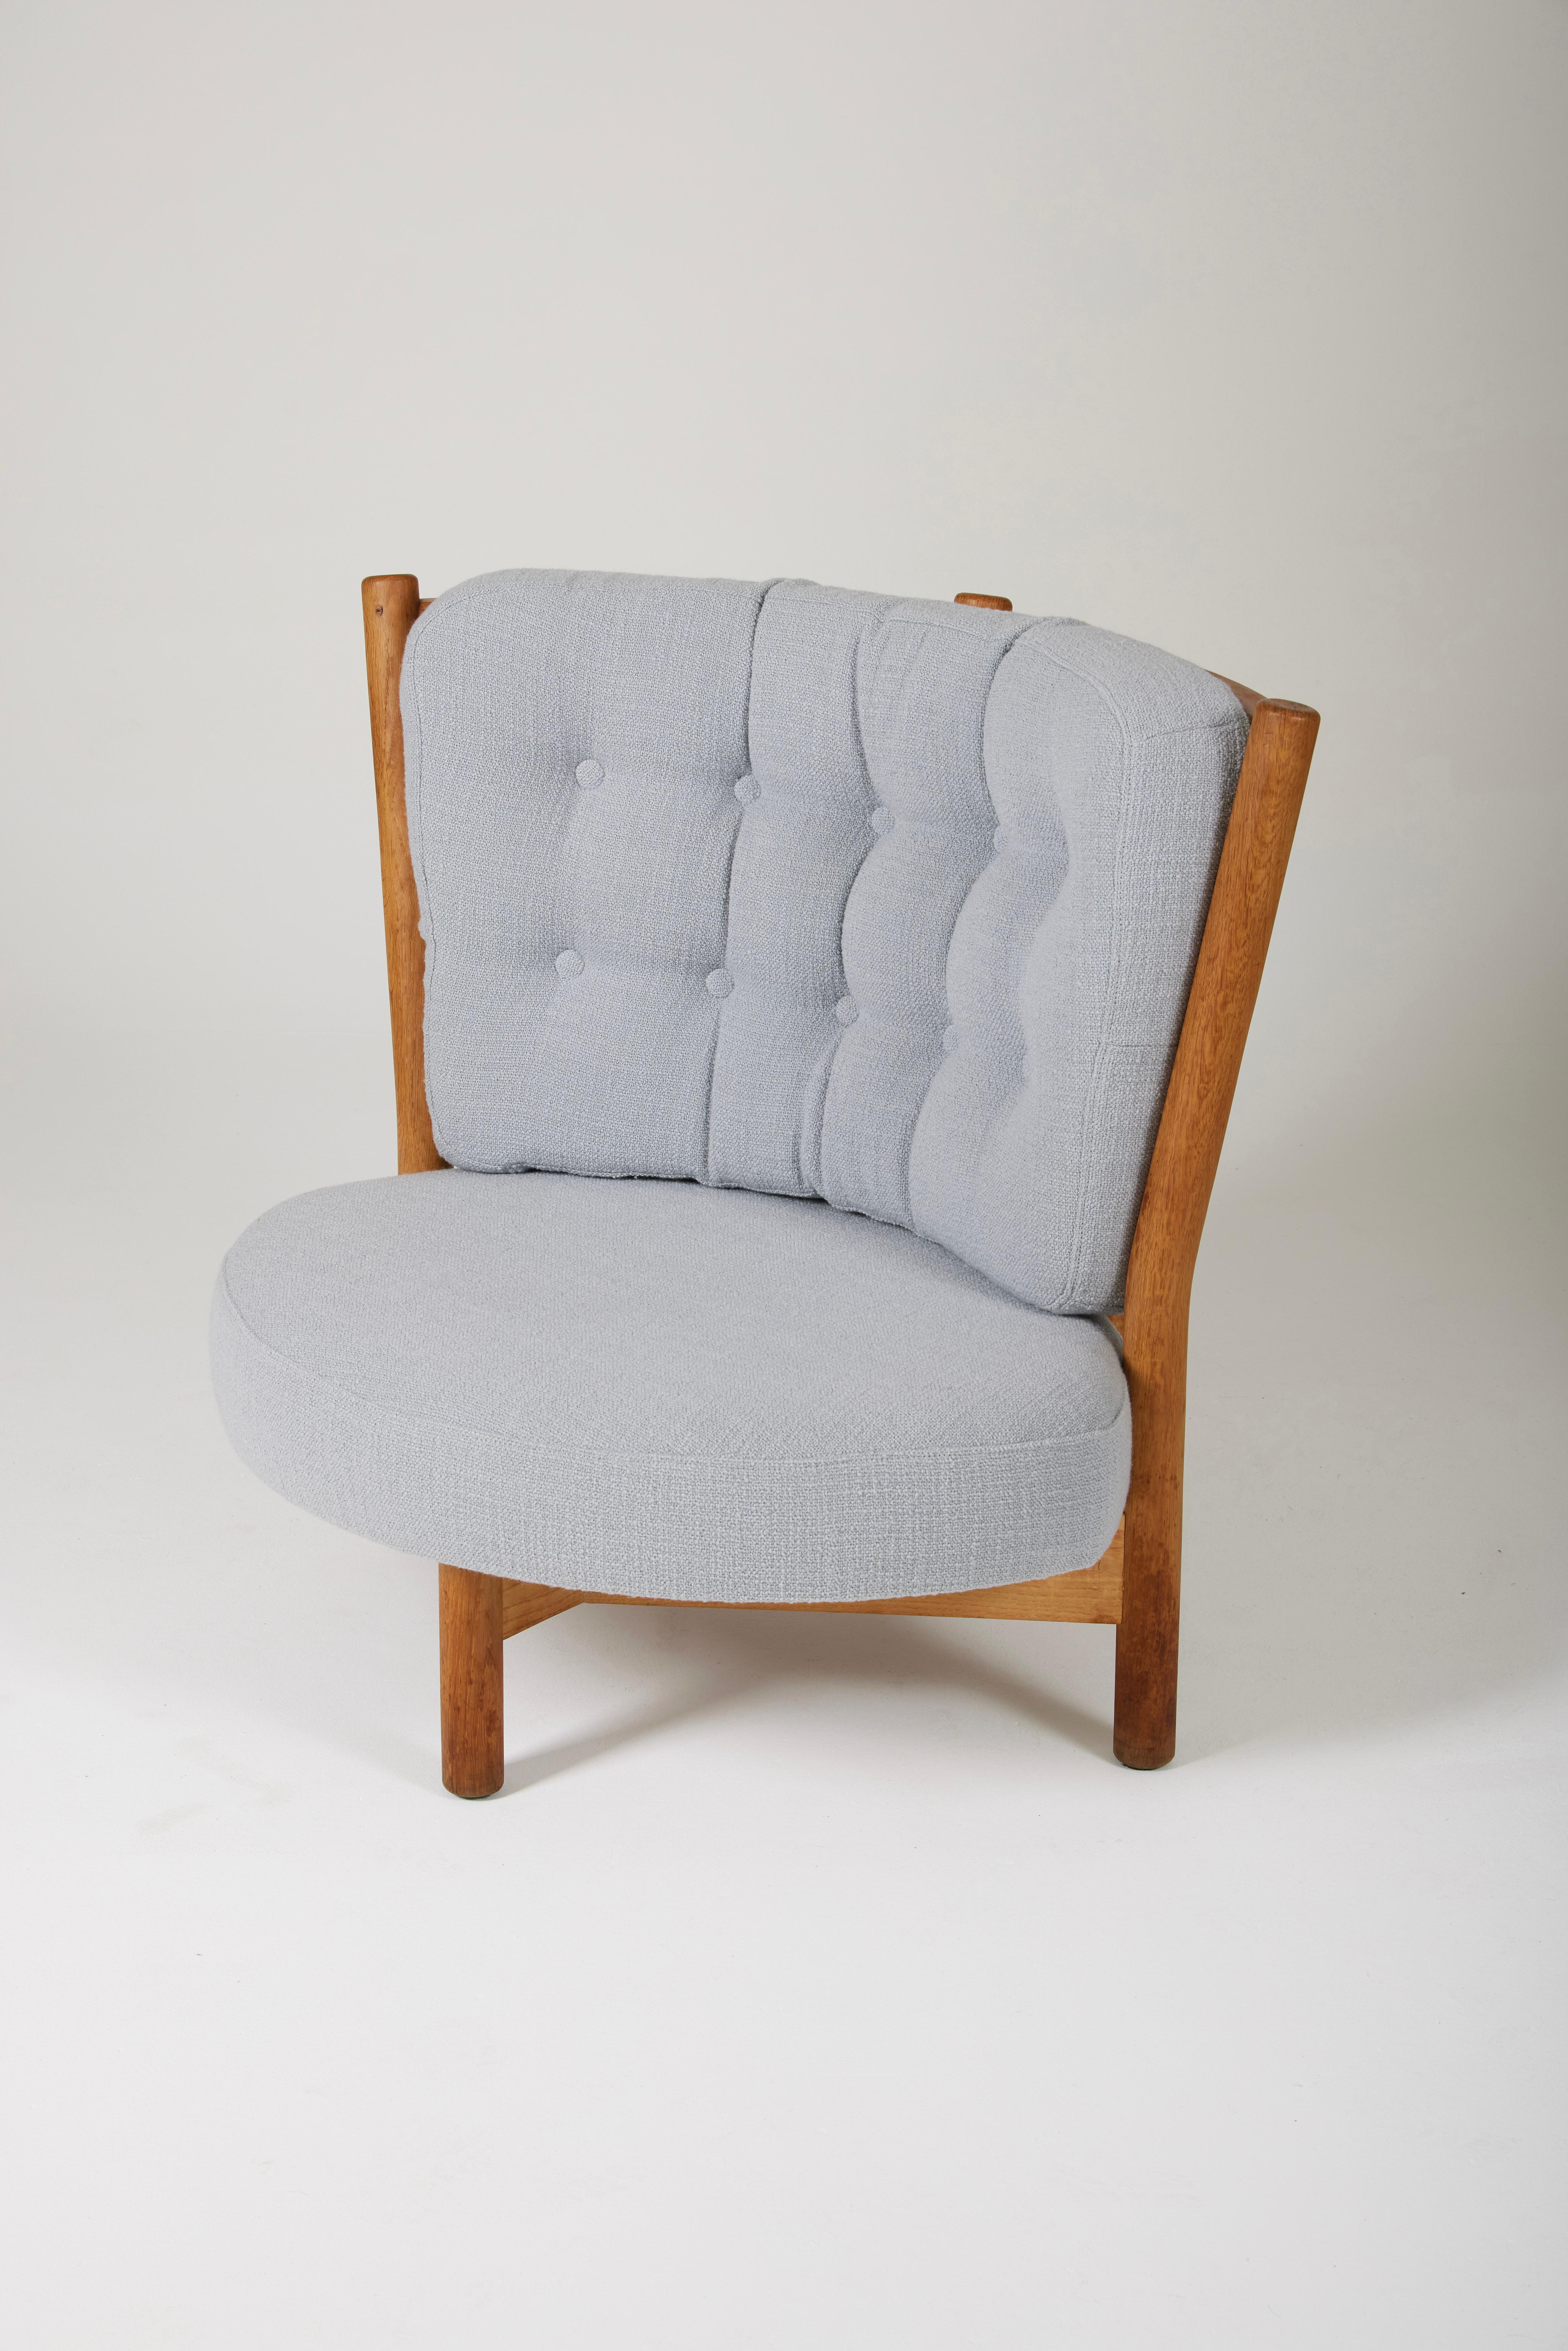 Armchair by Guillerme and Chambron, from the 1960s. Oak frame, seat and backrest completely reupholstered with high-quality 